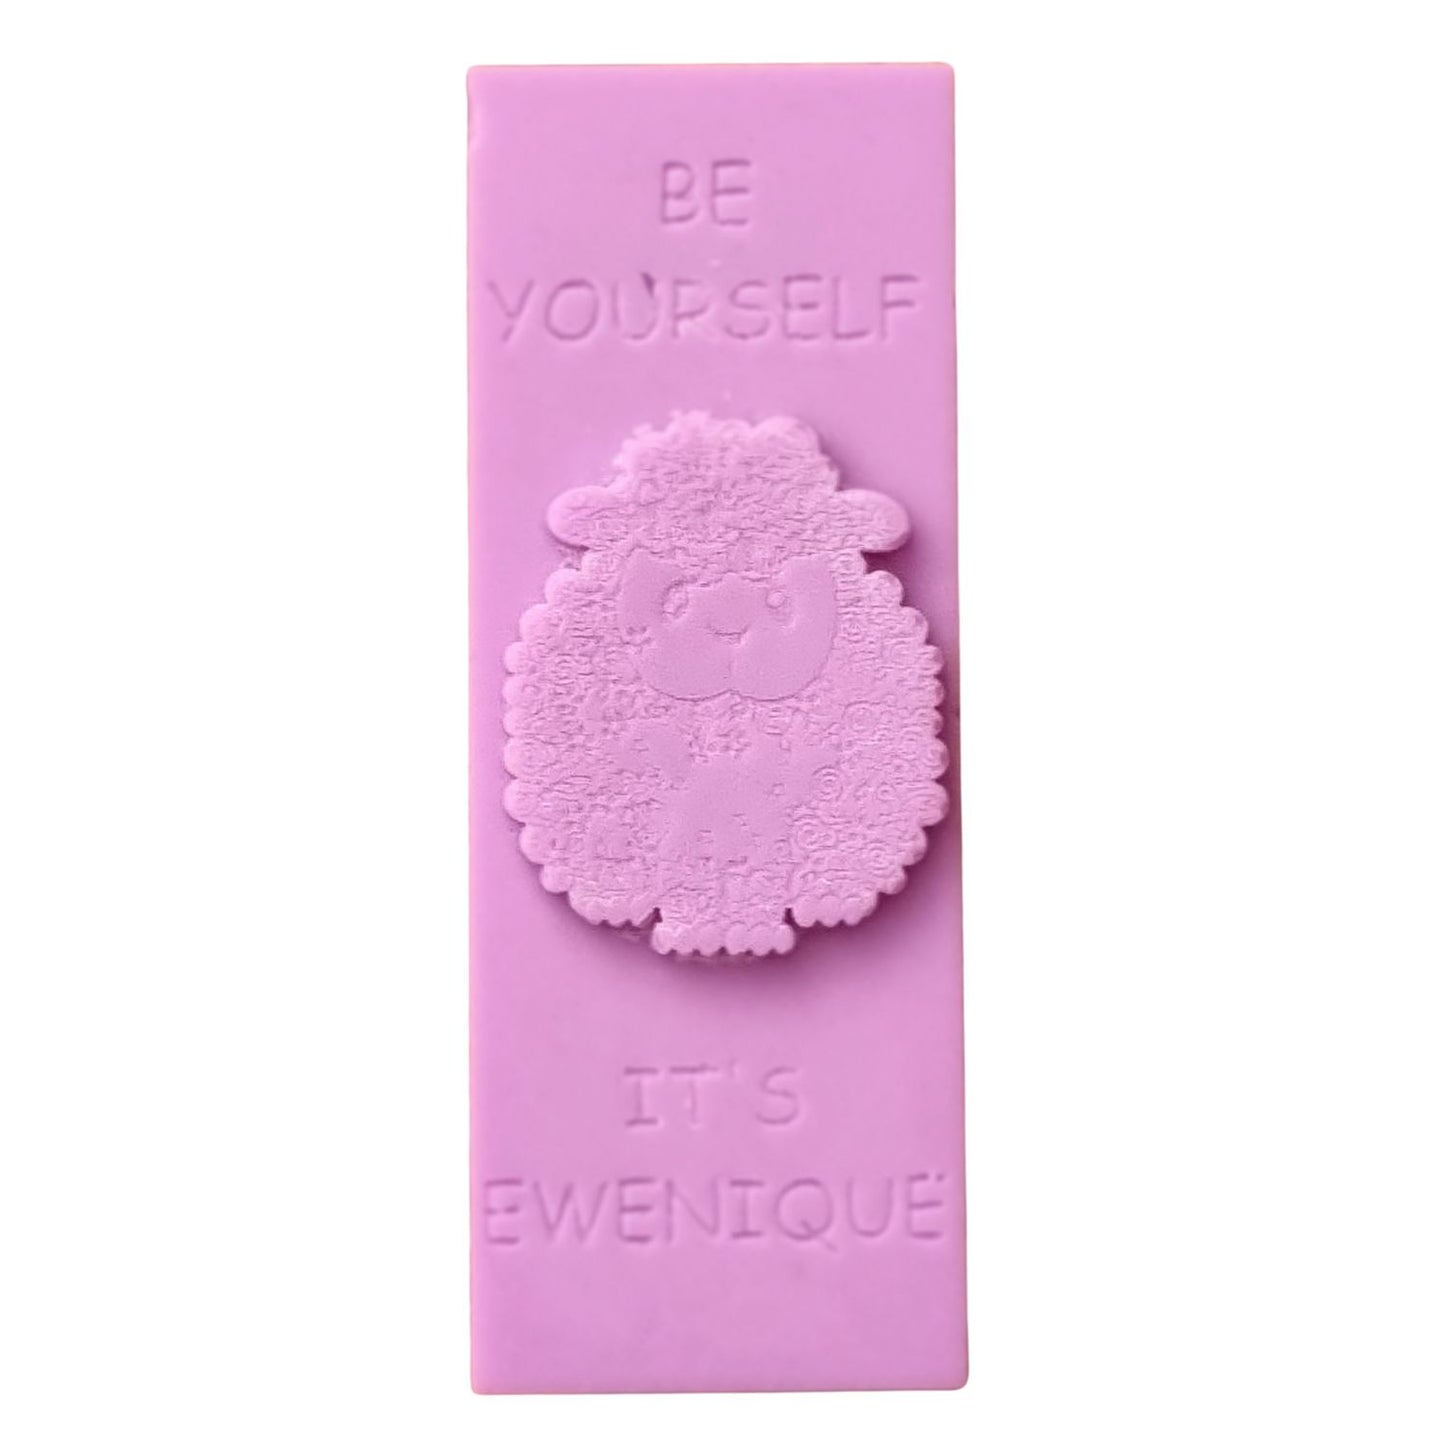 A pink coloured wax melt bar with a raised sheep design with the writing be yourself above and it's ewenique below.